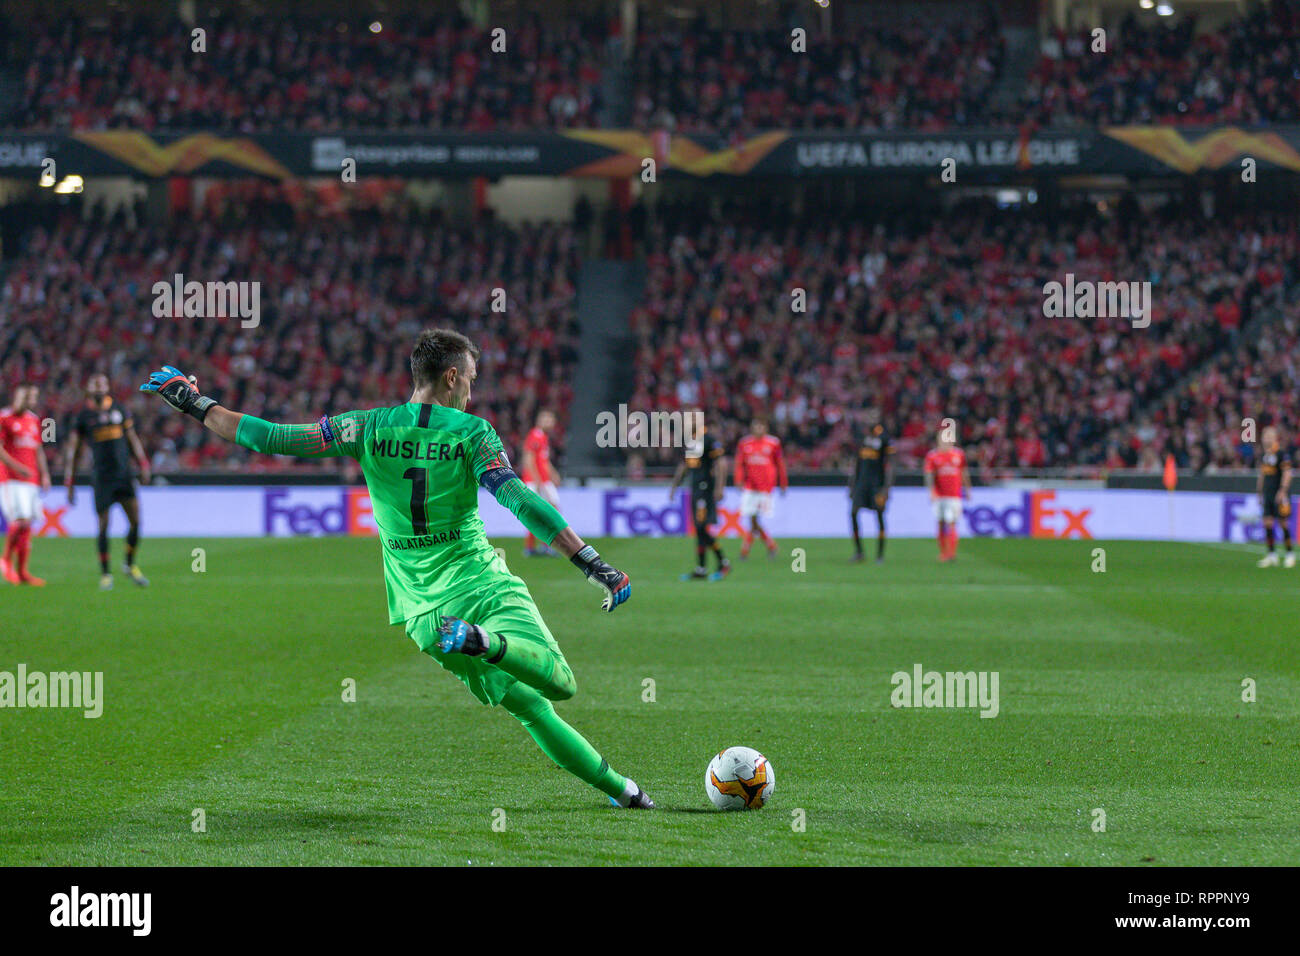 Lisbon, Portugal. 21st Feb, 2019. February 21, 2019. Lisbon, Portugal. Galatasaray's goalkeeper from Argentina Fernando Muslera (1) in action during the game of the UEFA Europa League, Round of 32, SL Benfica vs Galatasaray SK Credit: Alexandre de Sousa/Alamy Live News Stock Photo